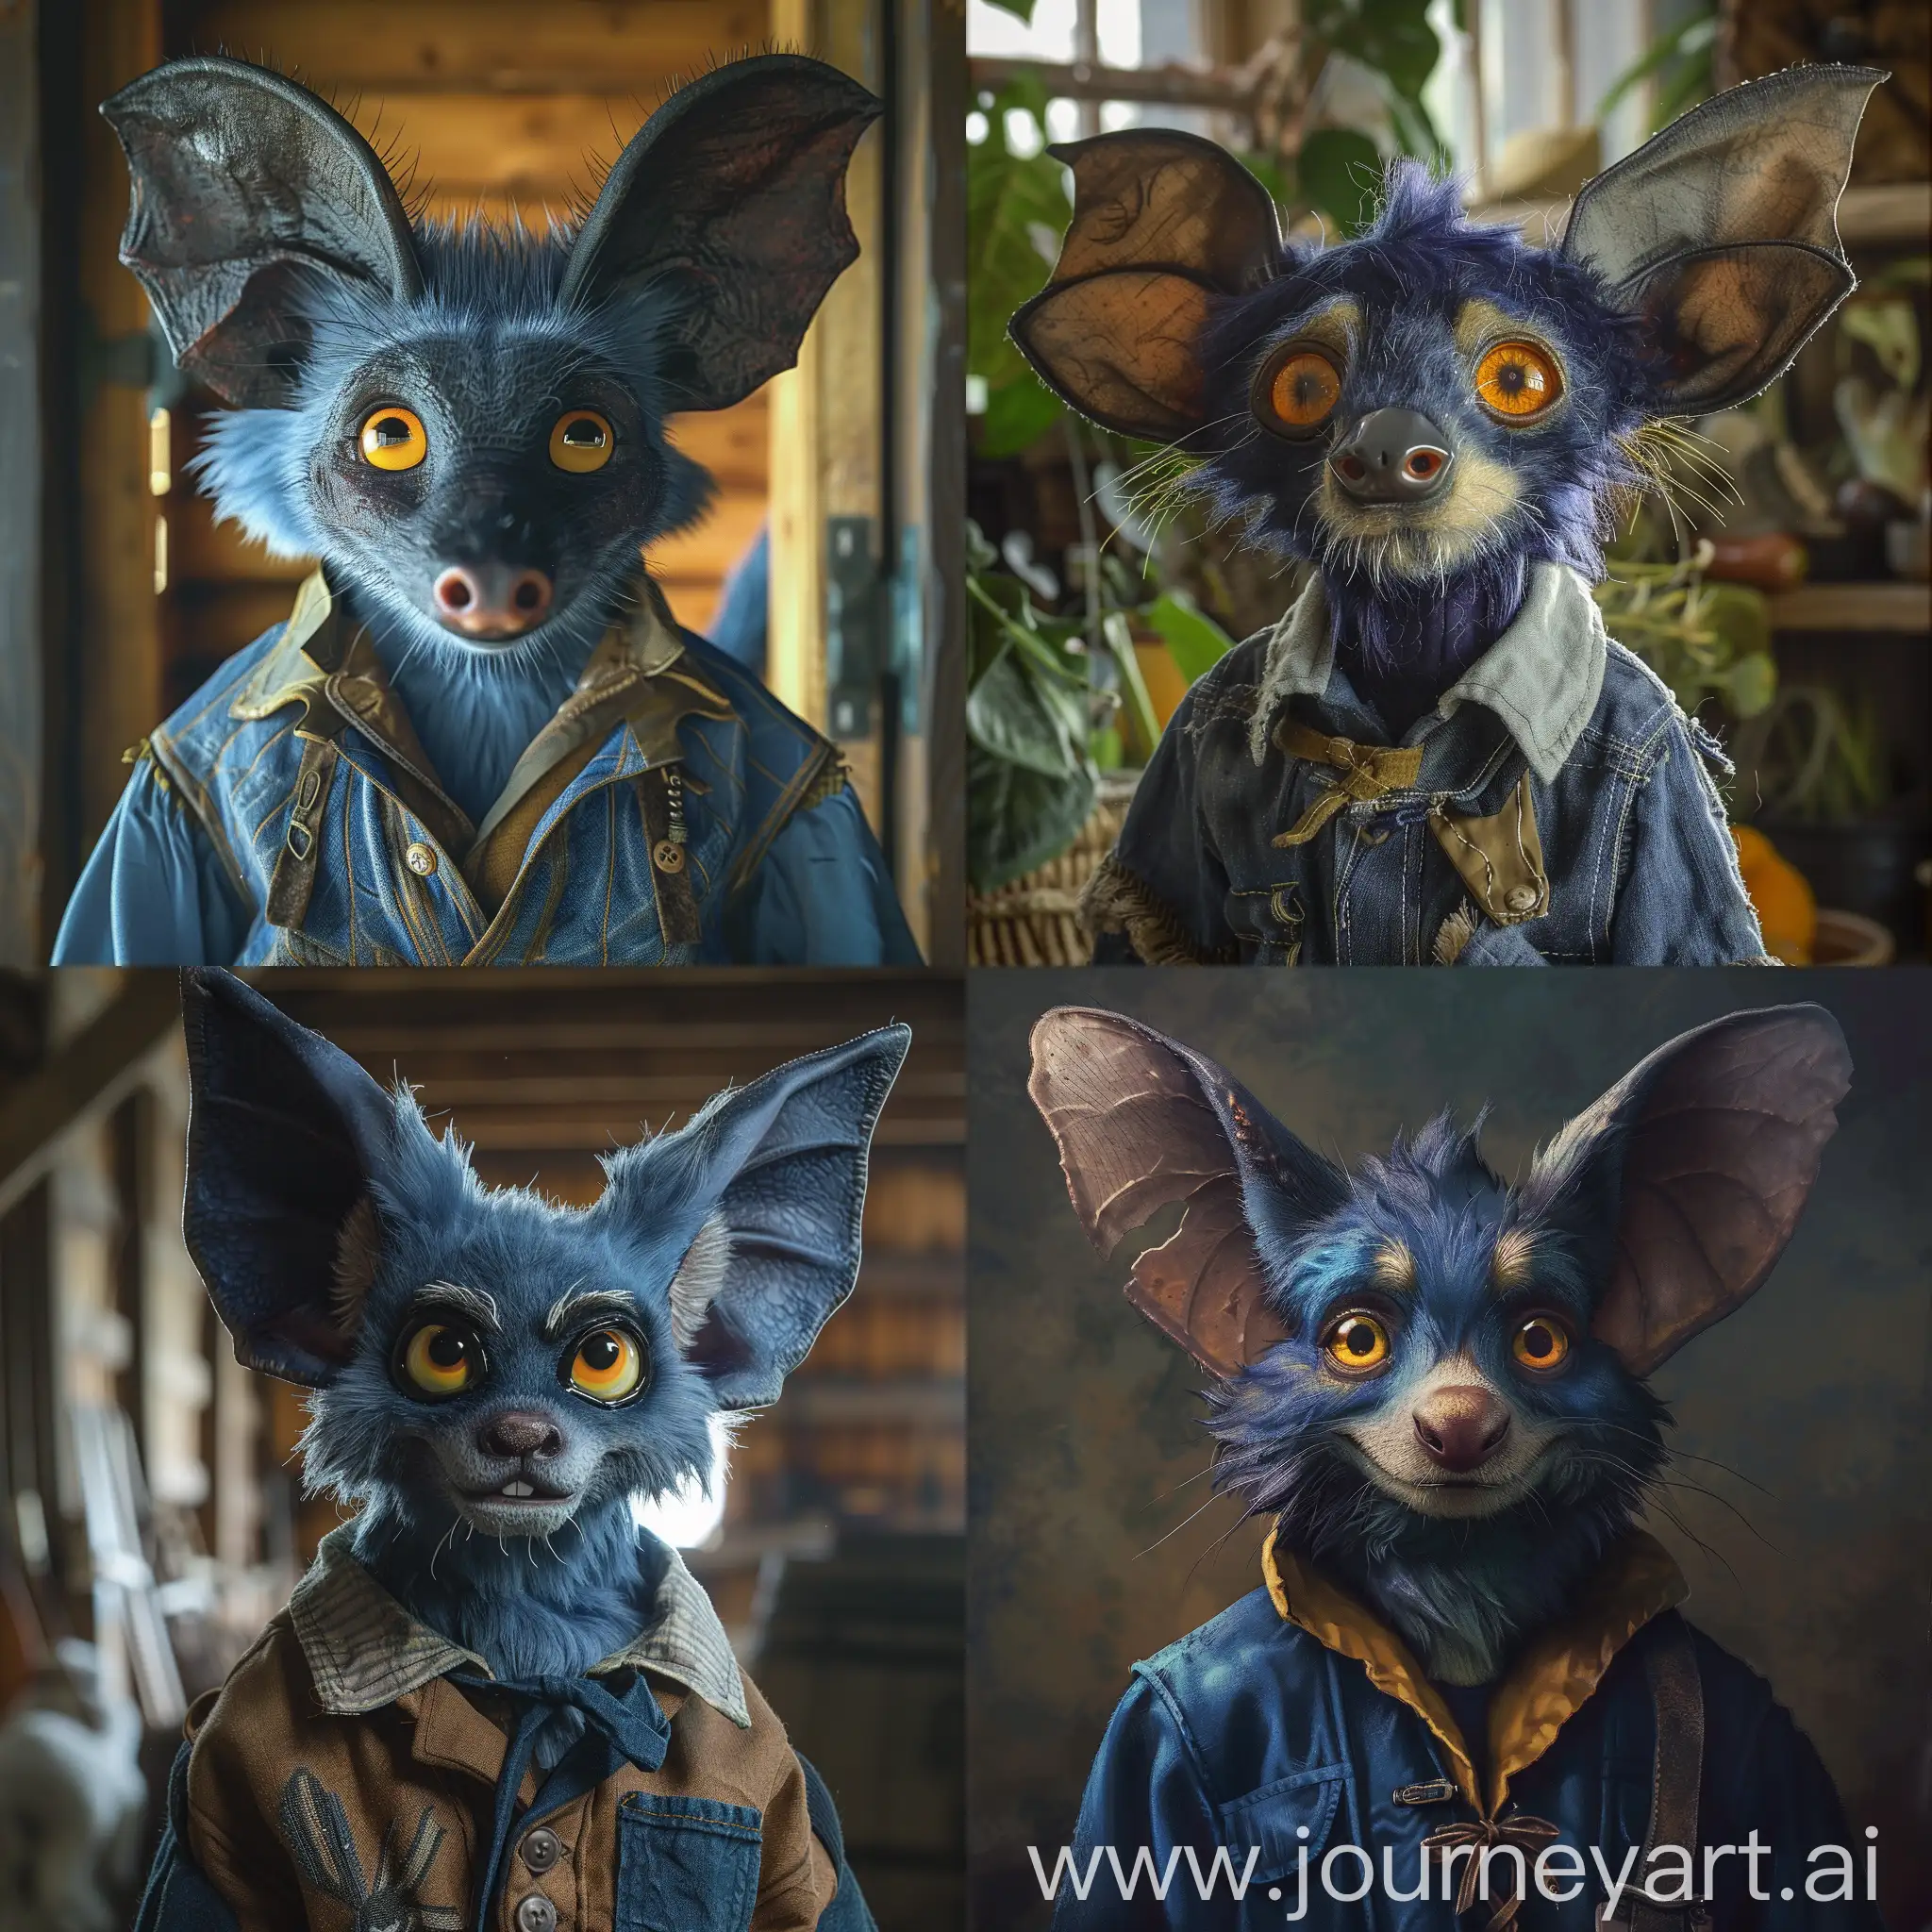 Humanoid anthro male rodent canine hybrid wearing comfortable farming clothes. scruffy dodger blue fur. Large yellow eyes. Large bat-like ears. Warm friendly expression. Photograph.